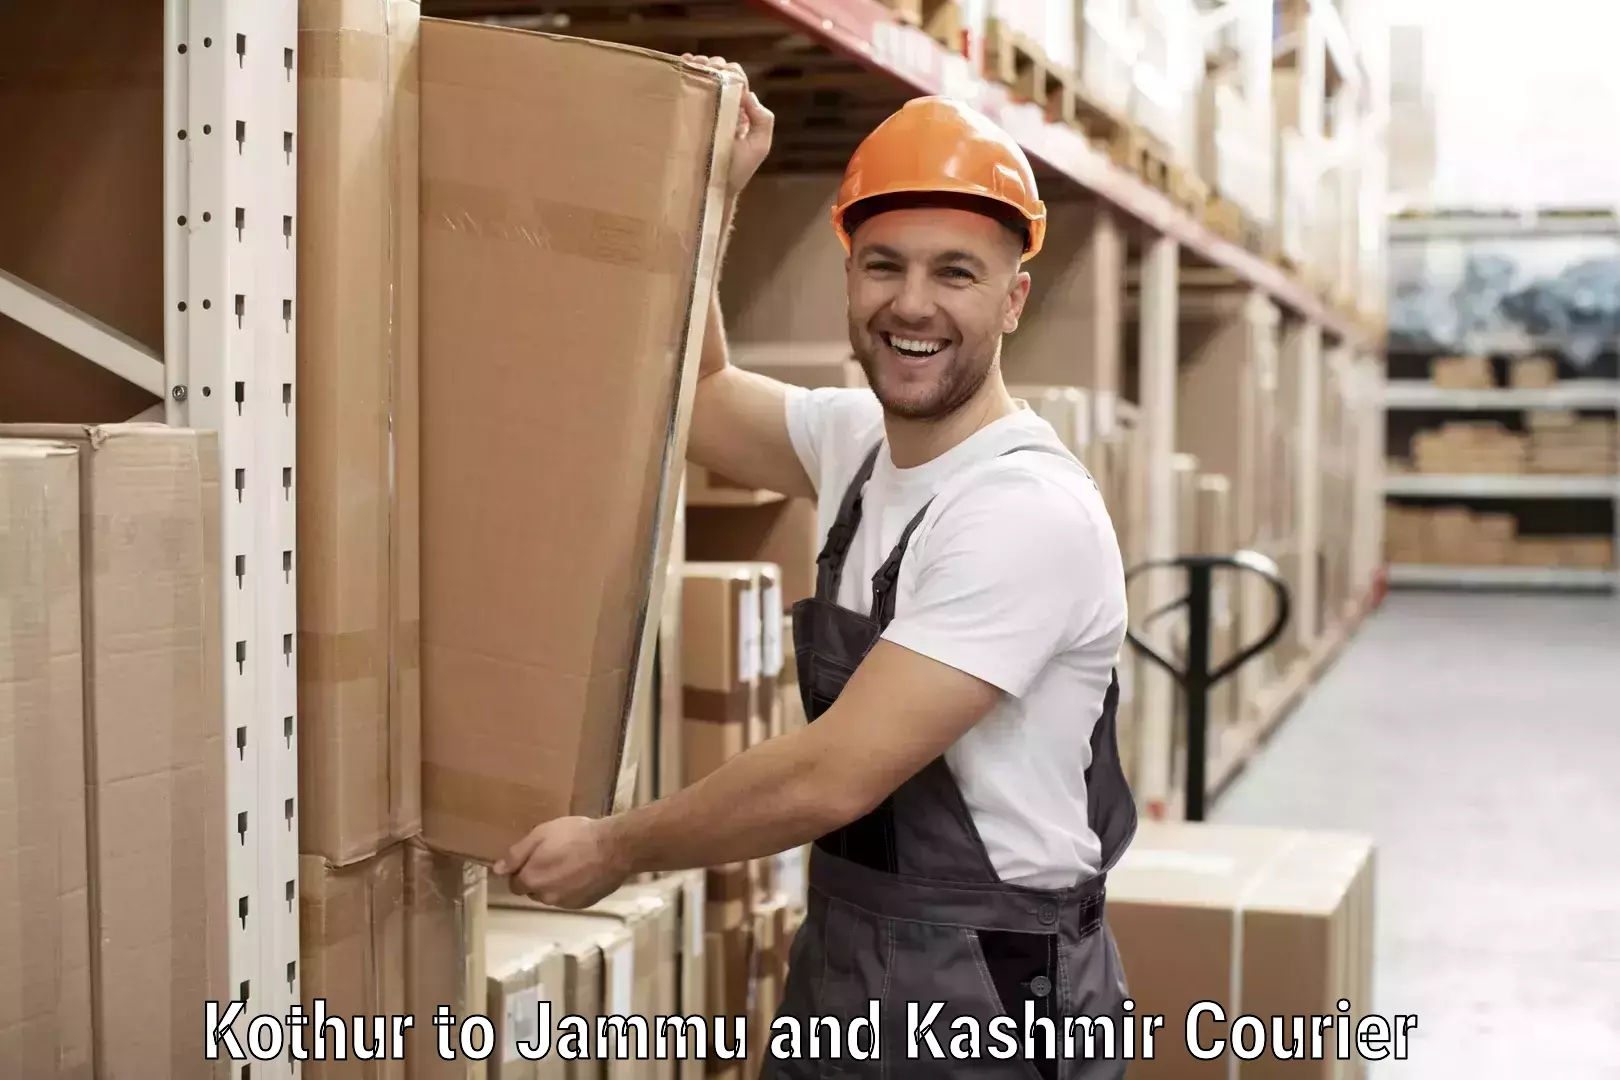 Supply chain efficiency Kothur to Shopian